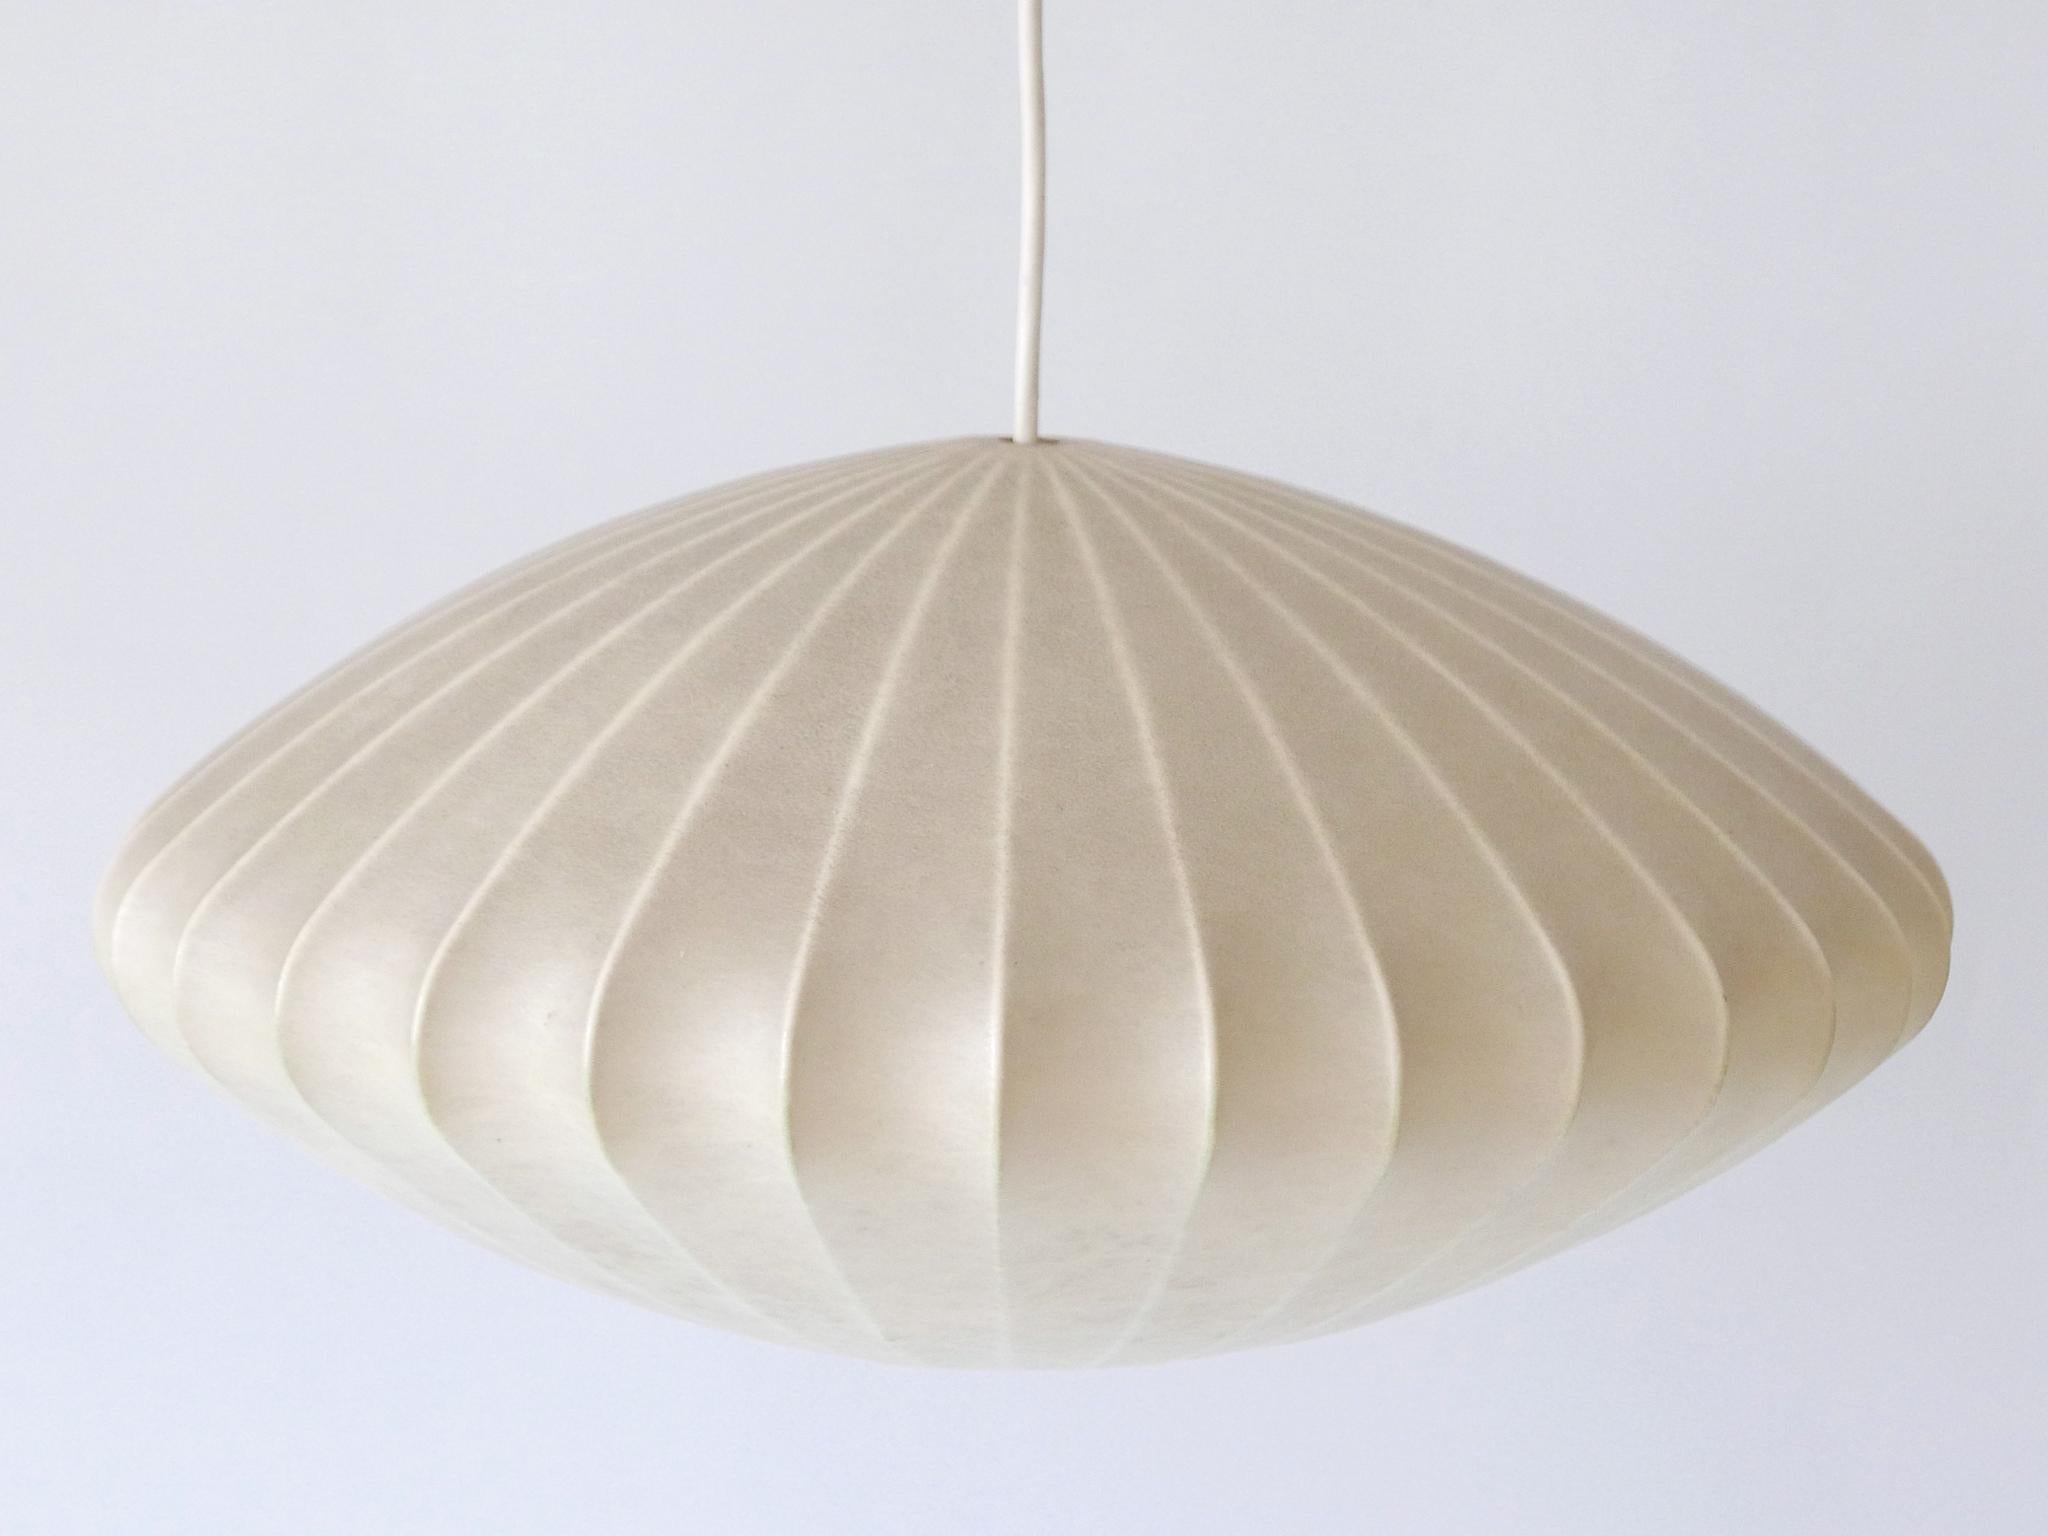 Rare Mid-Century Modern Cocoon Pendant Lamp or Hanging Light by Goldkant 1960s For Sale 4